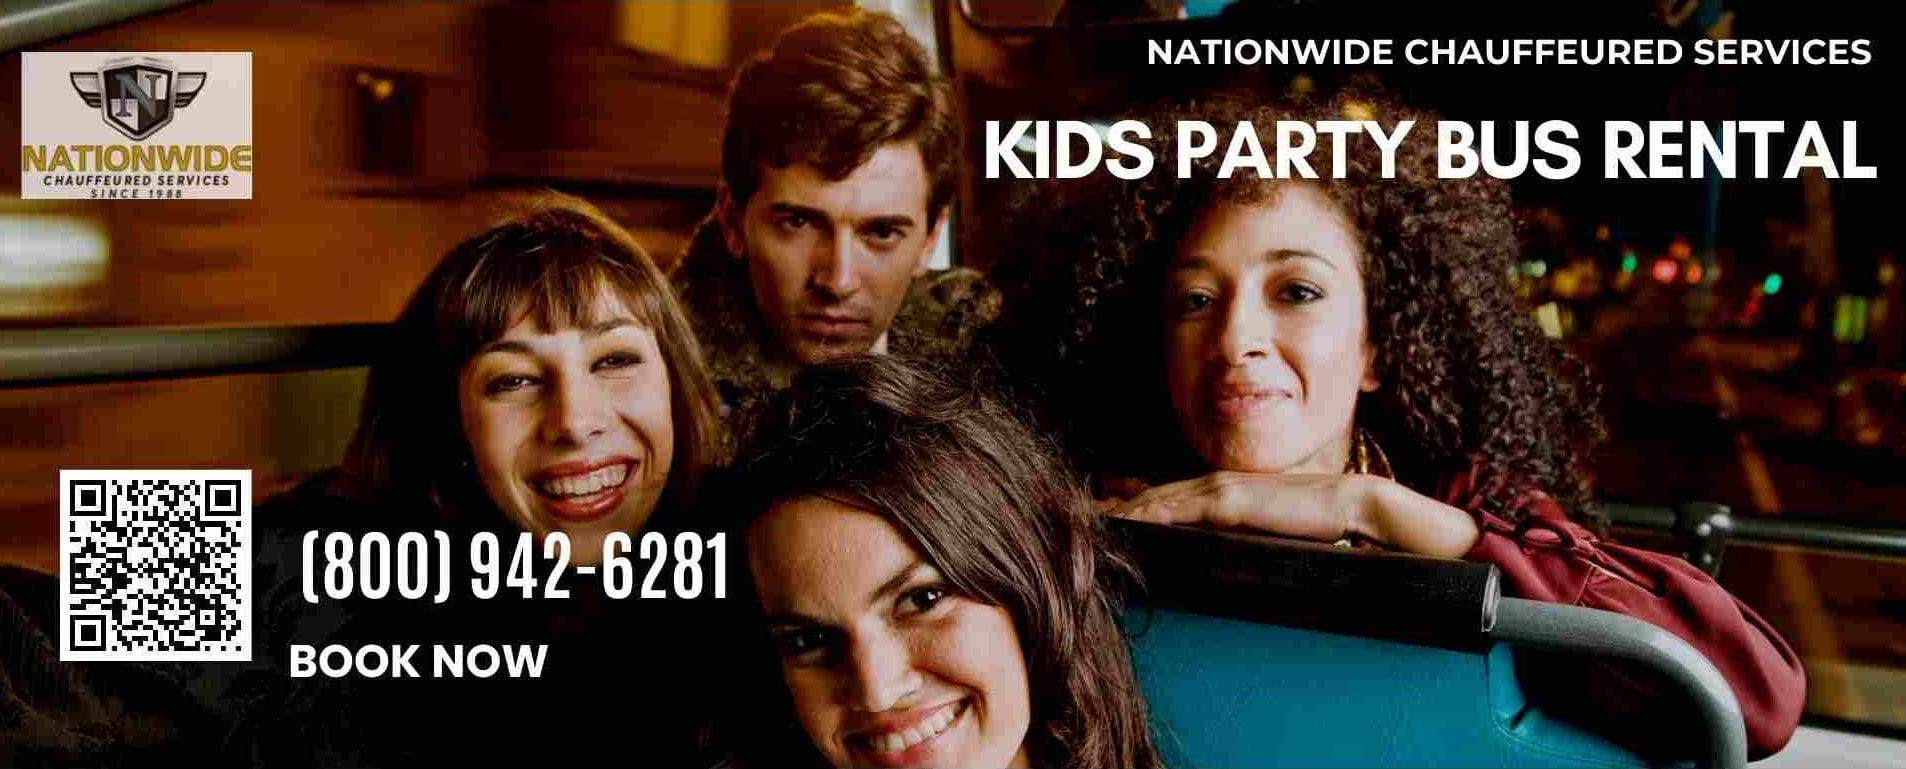 Party Bus Rental For Kids